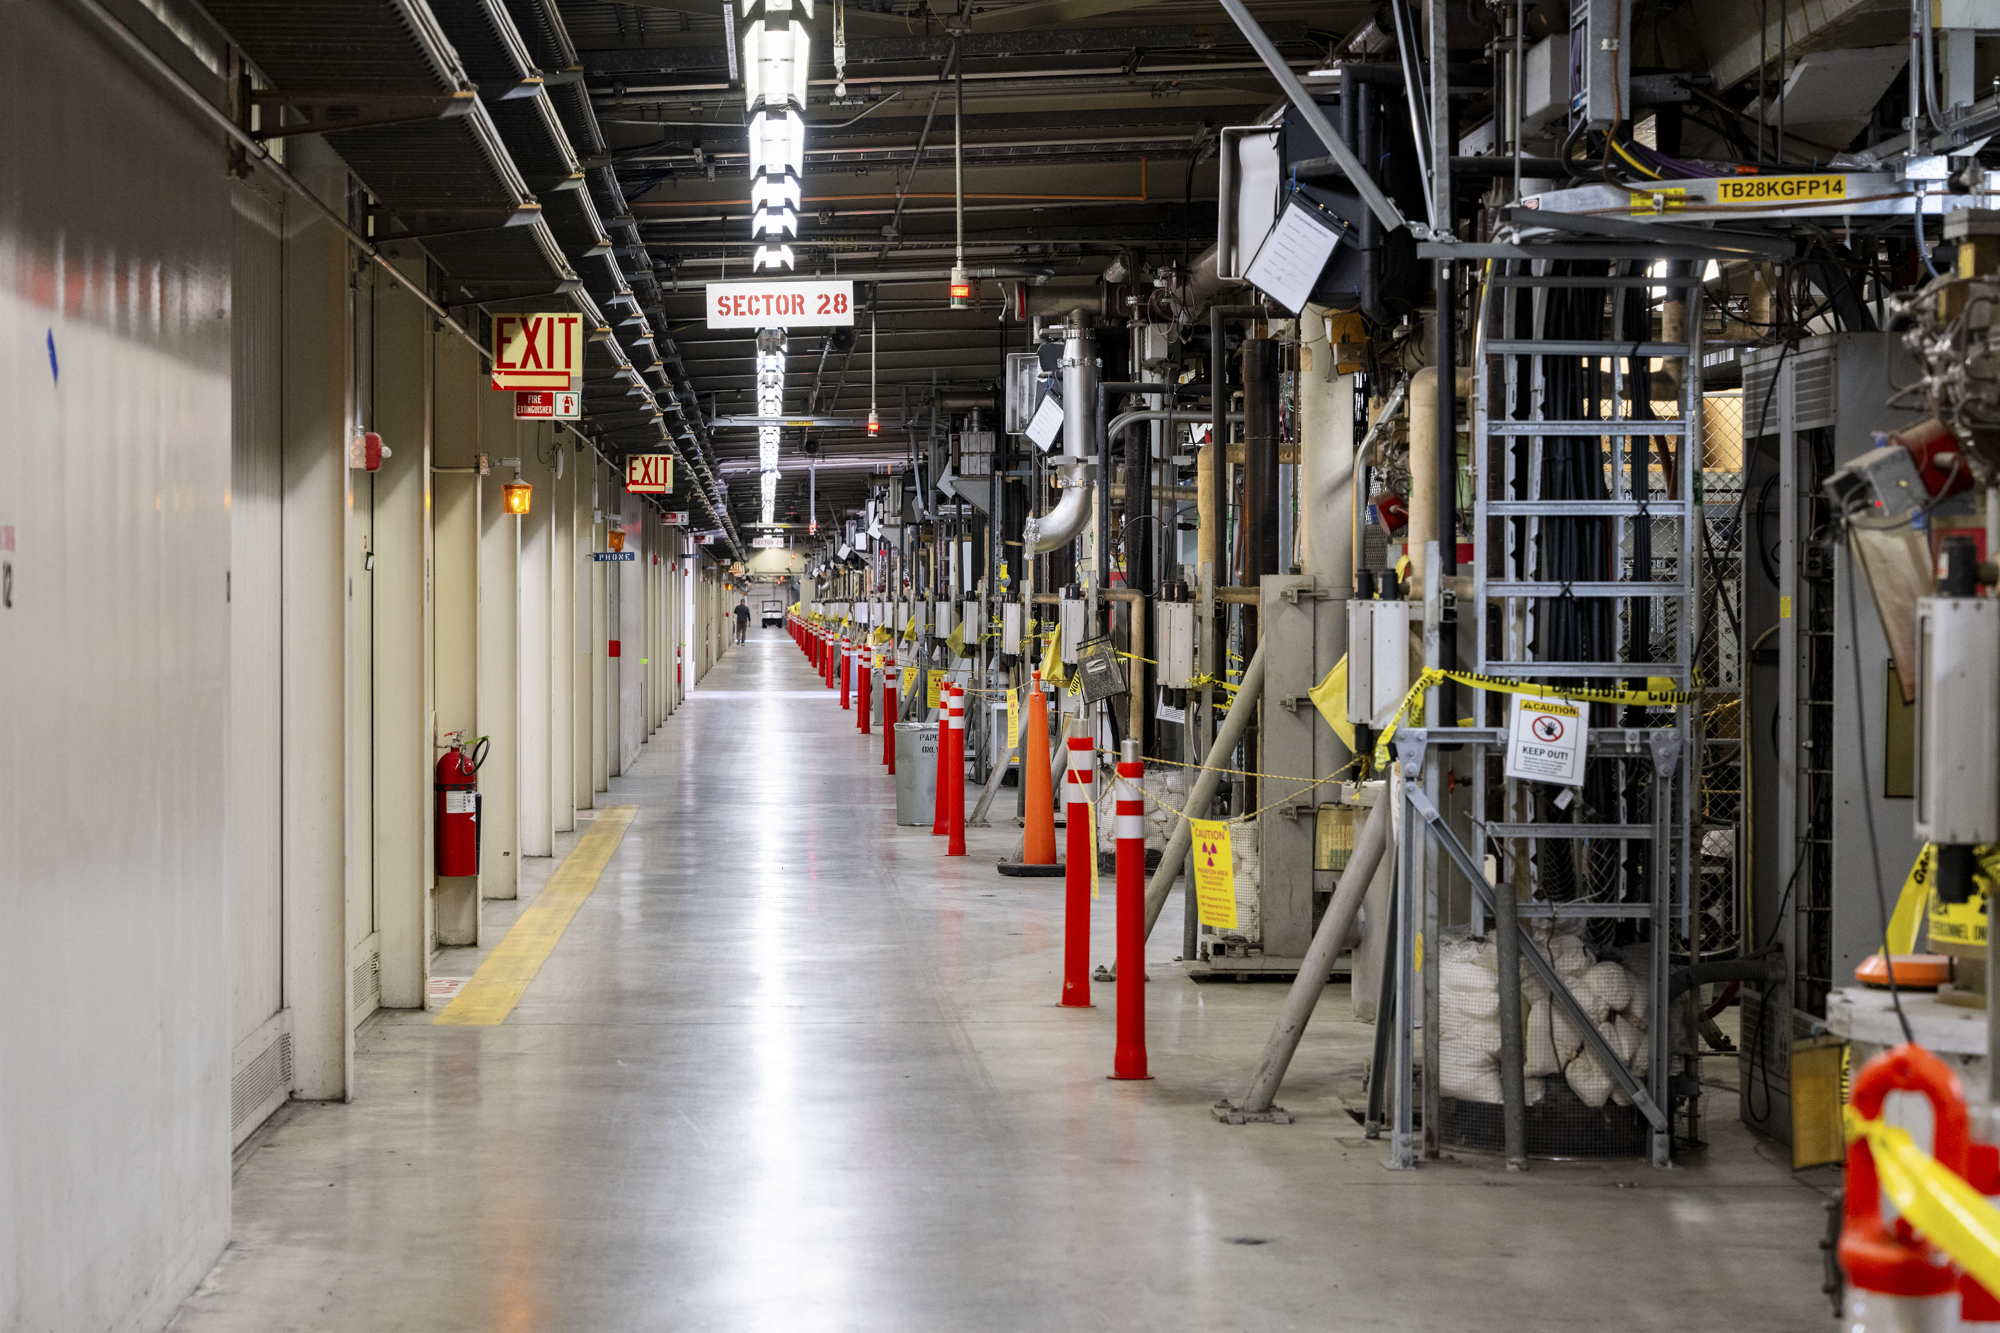 A long room that you cannot see the end of. It is about 20 feet wide. On the left is a walkway for people and small vehicles. On the right side of the image, is the linear accelerator equipment, which looks like a lot of tubes and wires.